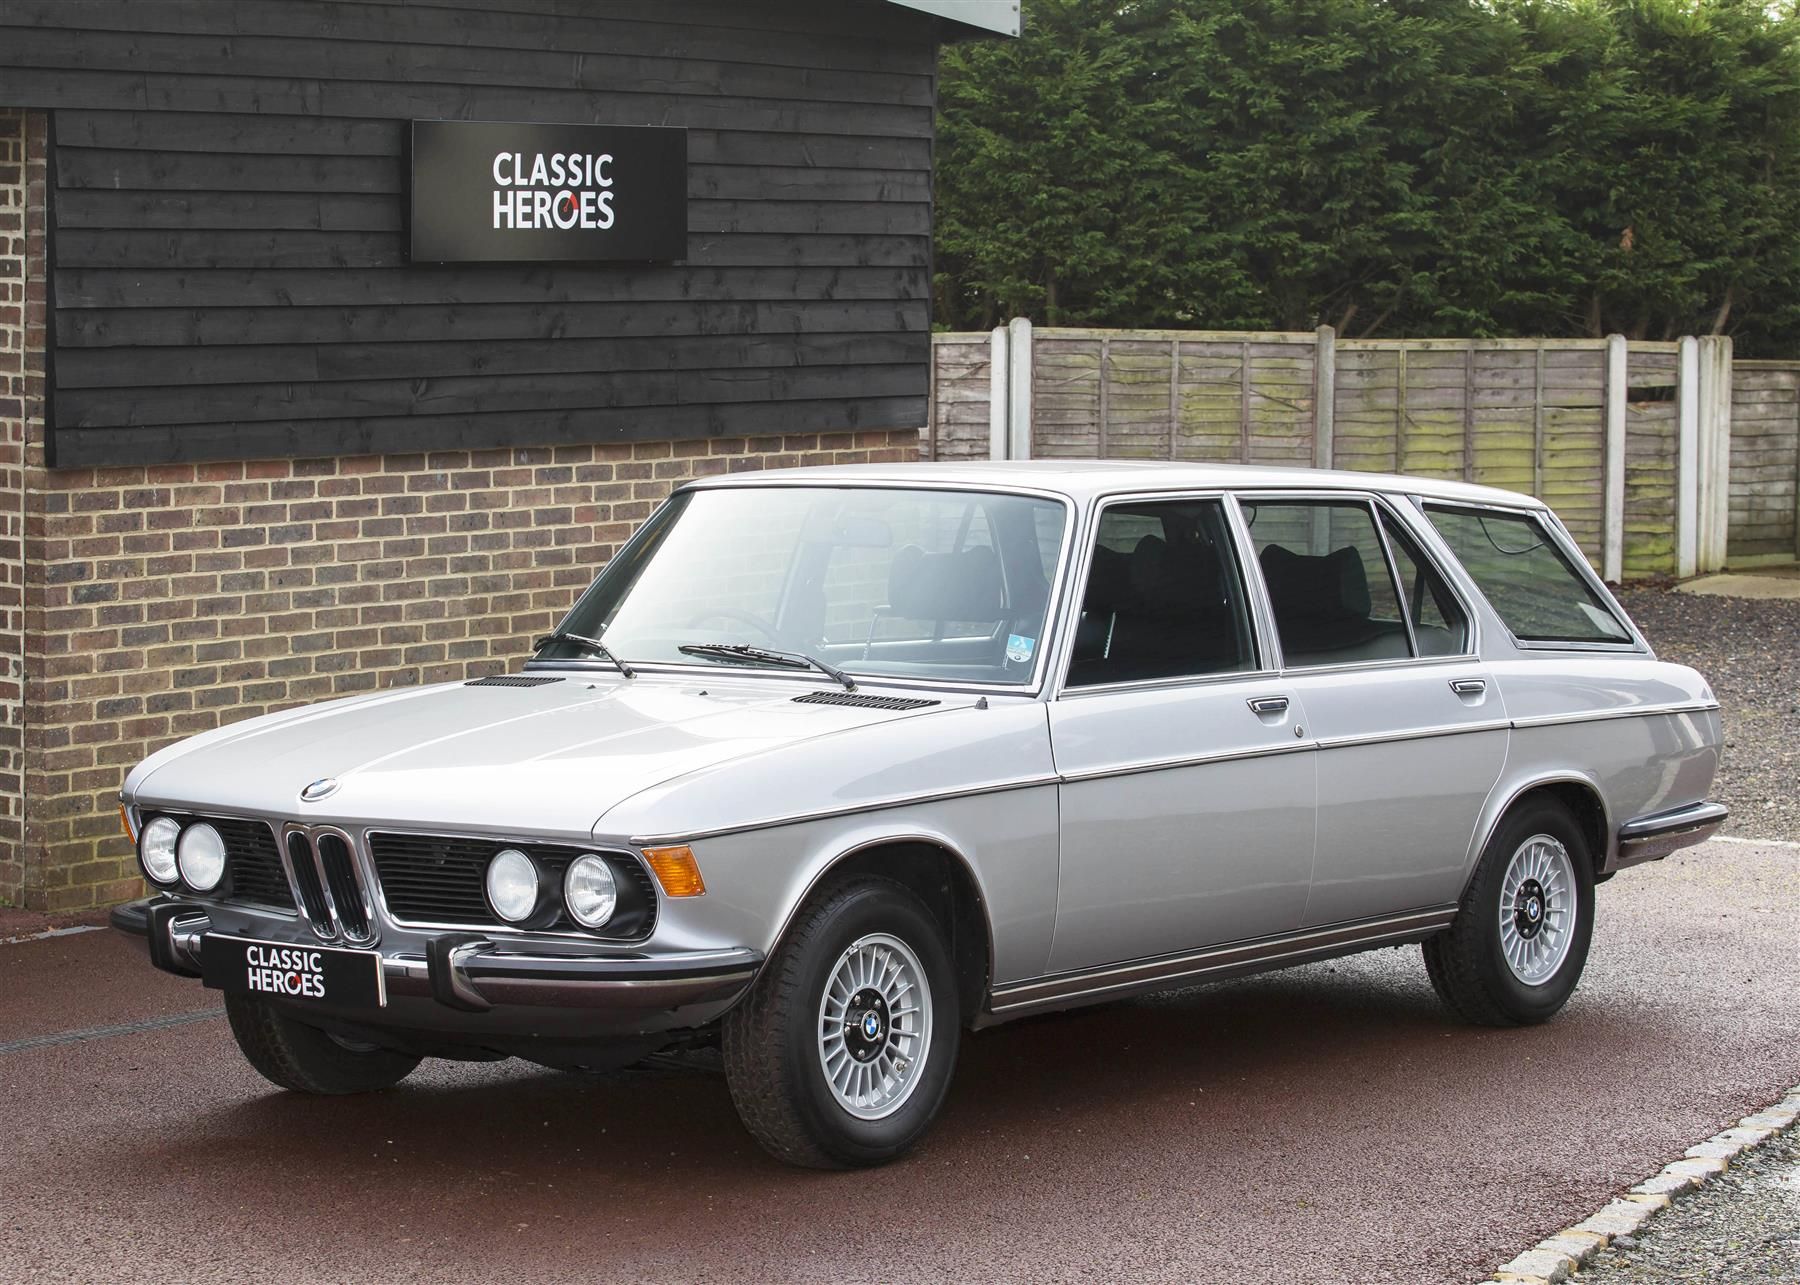 This Ultra-Rare BMW E3 3.0 Si Estate Is the Concours Cruiser